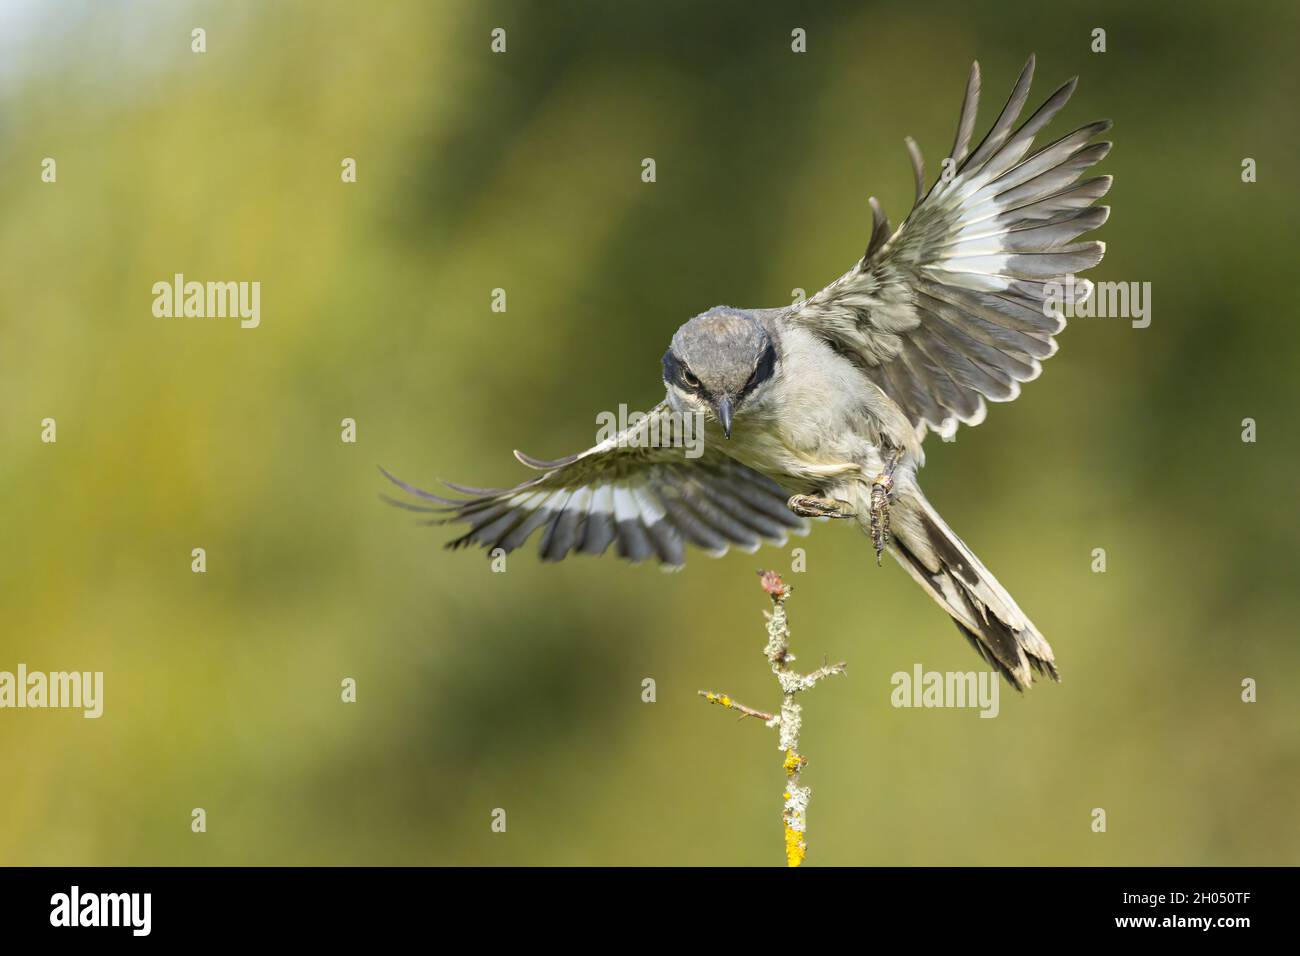 A great grey shrike approaching a twig with food Stock Photo